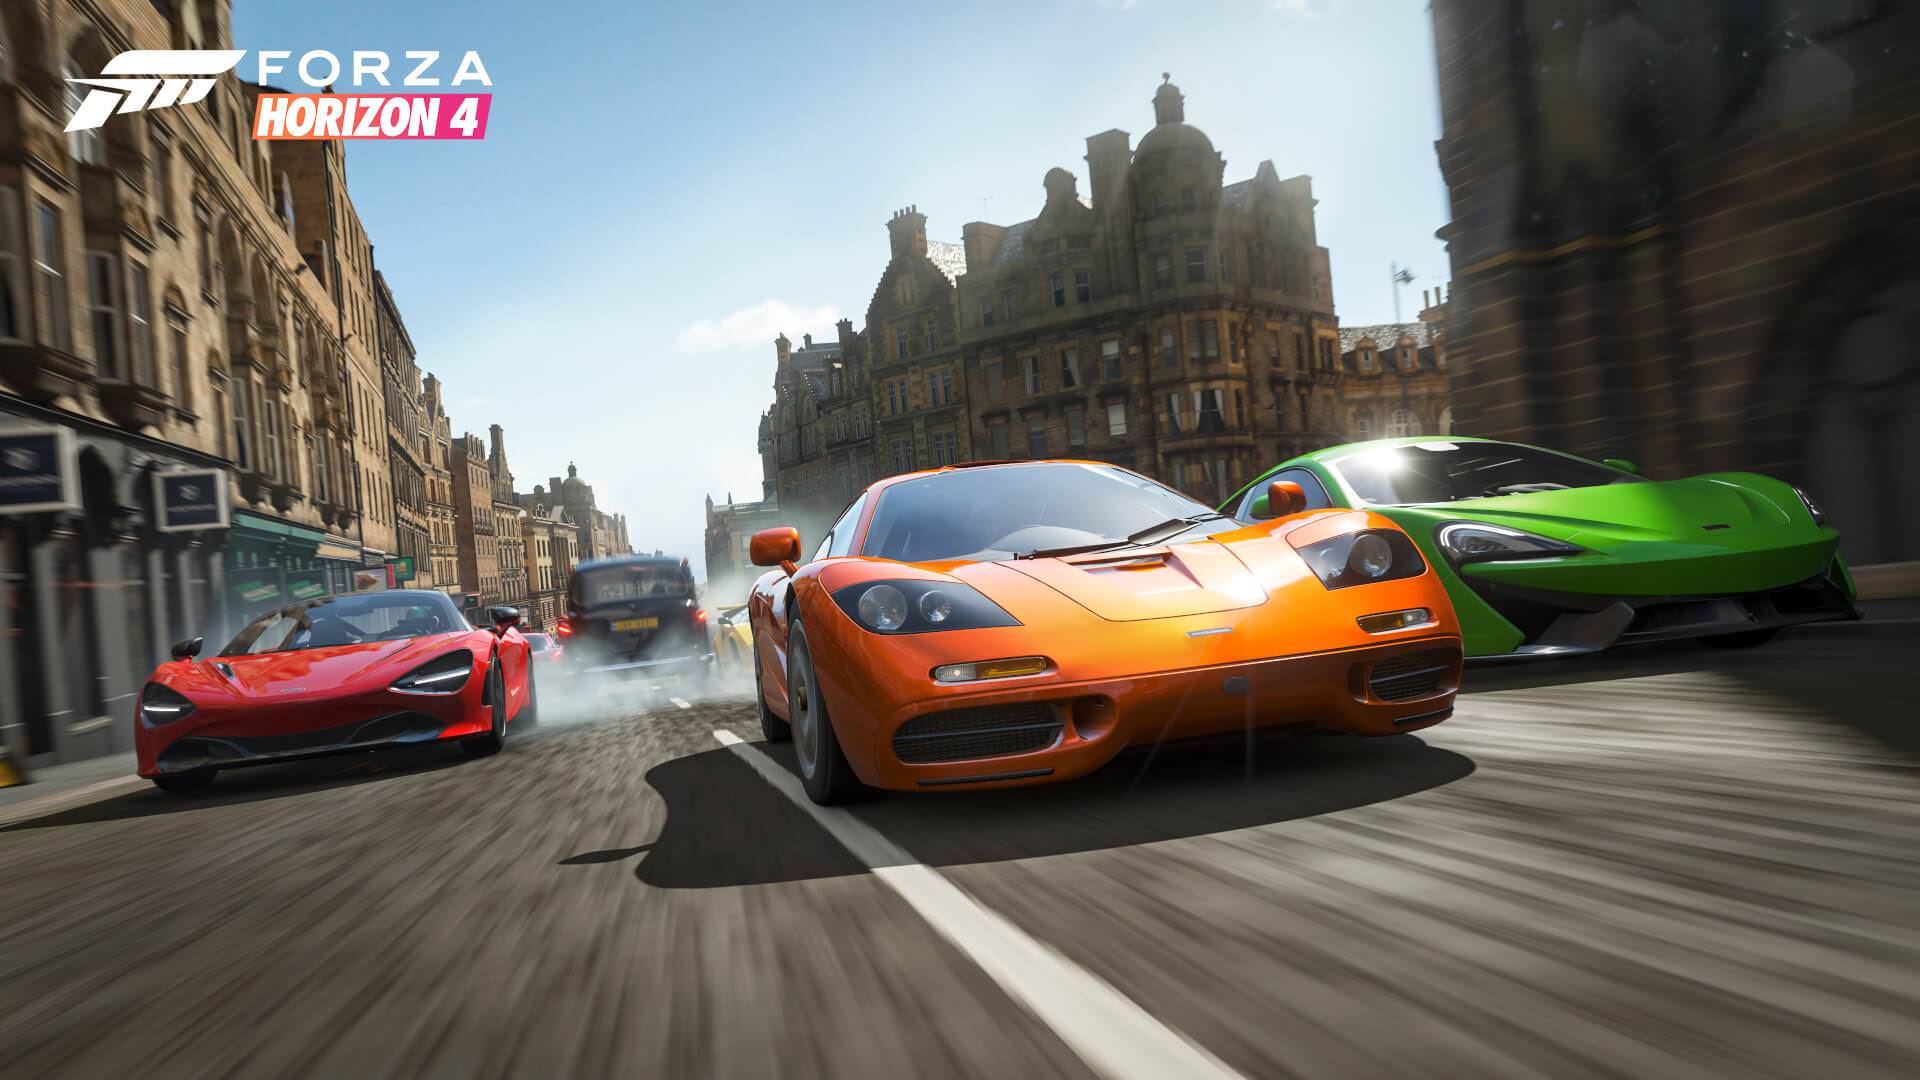 The 15 Fastest Cars In Forza Horizon 4 (& How Fast They Can Go)